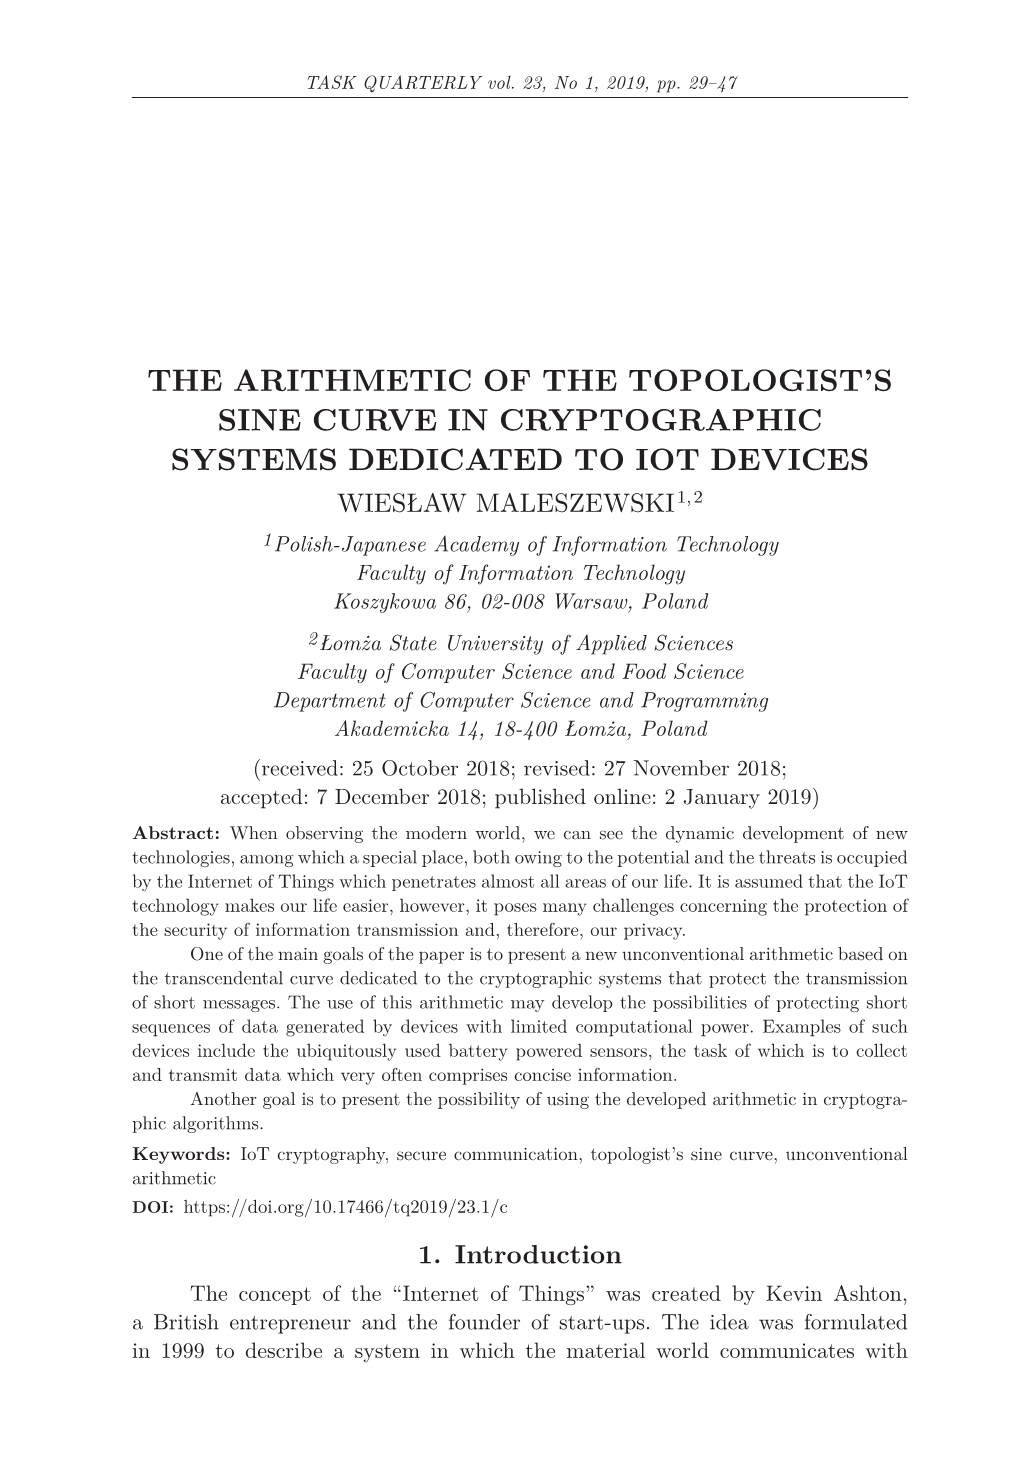 The Arithmetic of the Topologist's Sine Curve in Cryptographic Systems Dedicated to Iot Devices